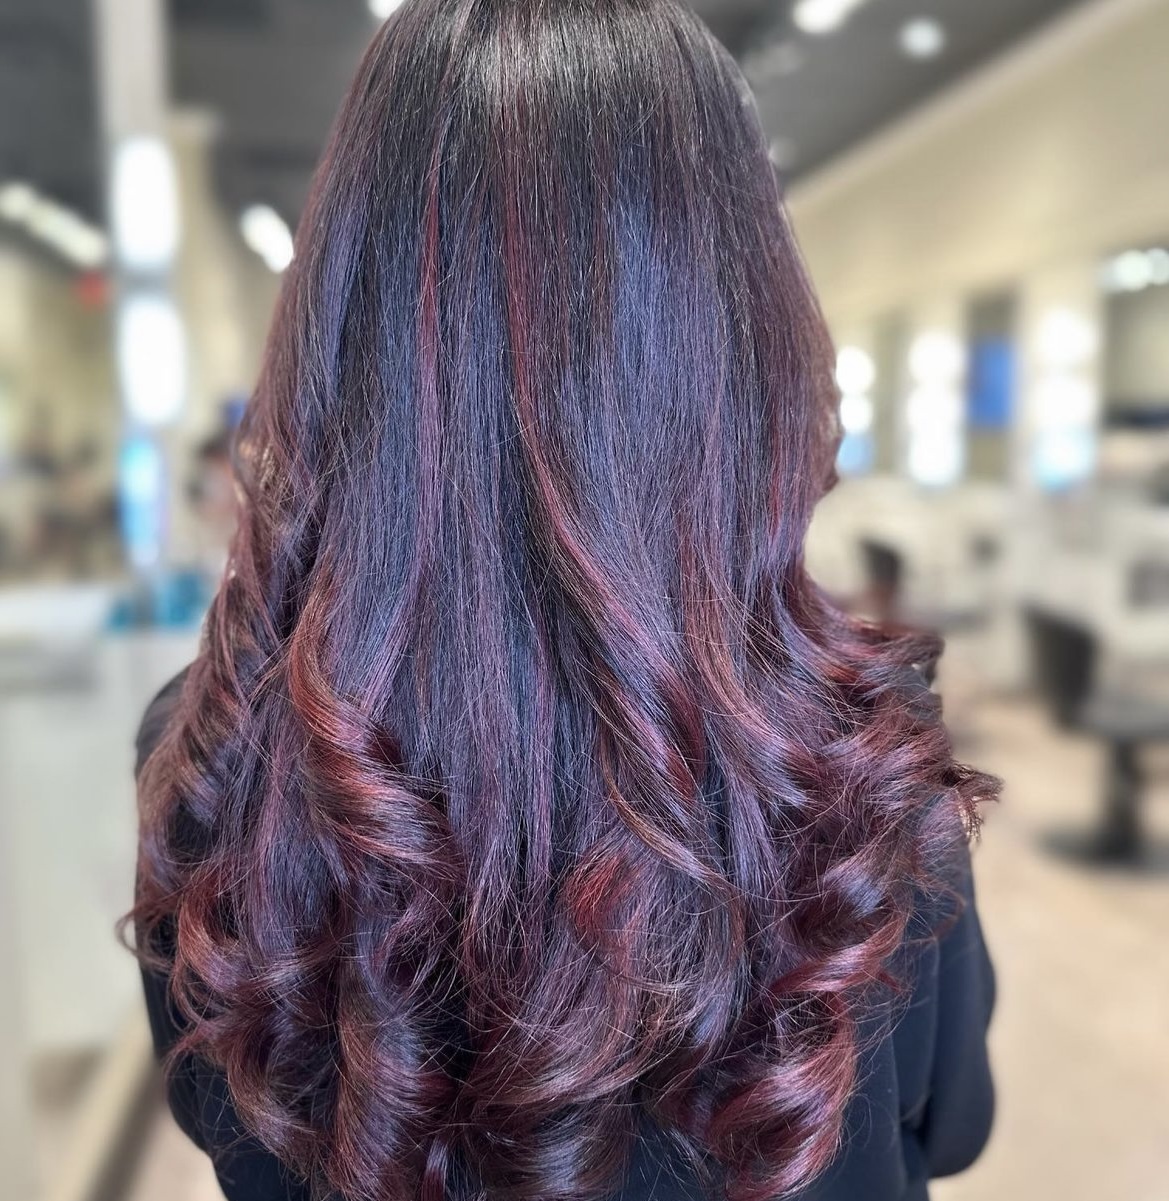 Hair Coloring & Highlights Options in Winter Park